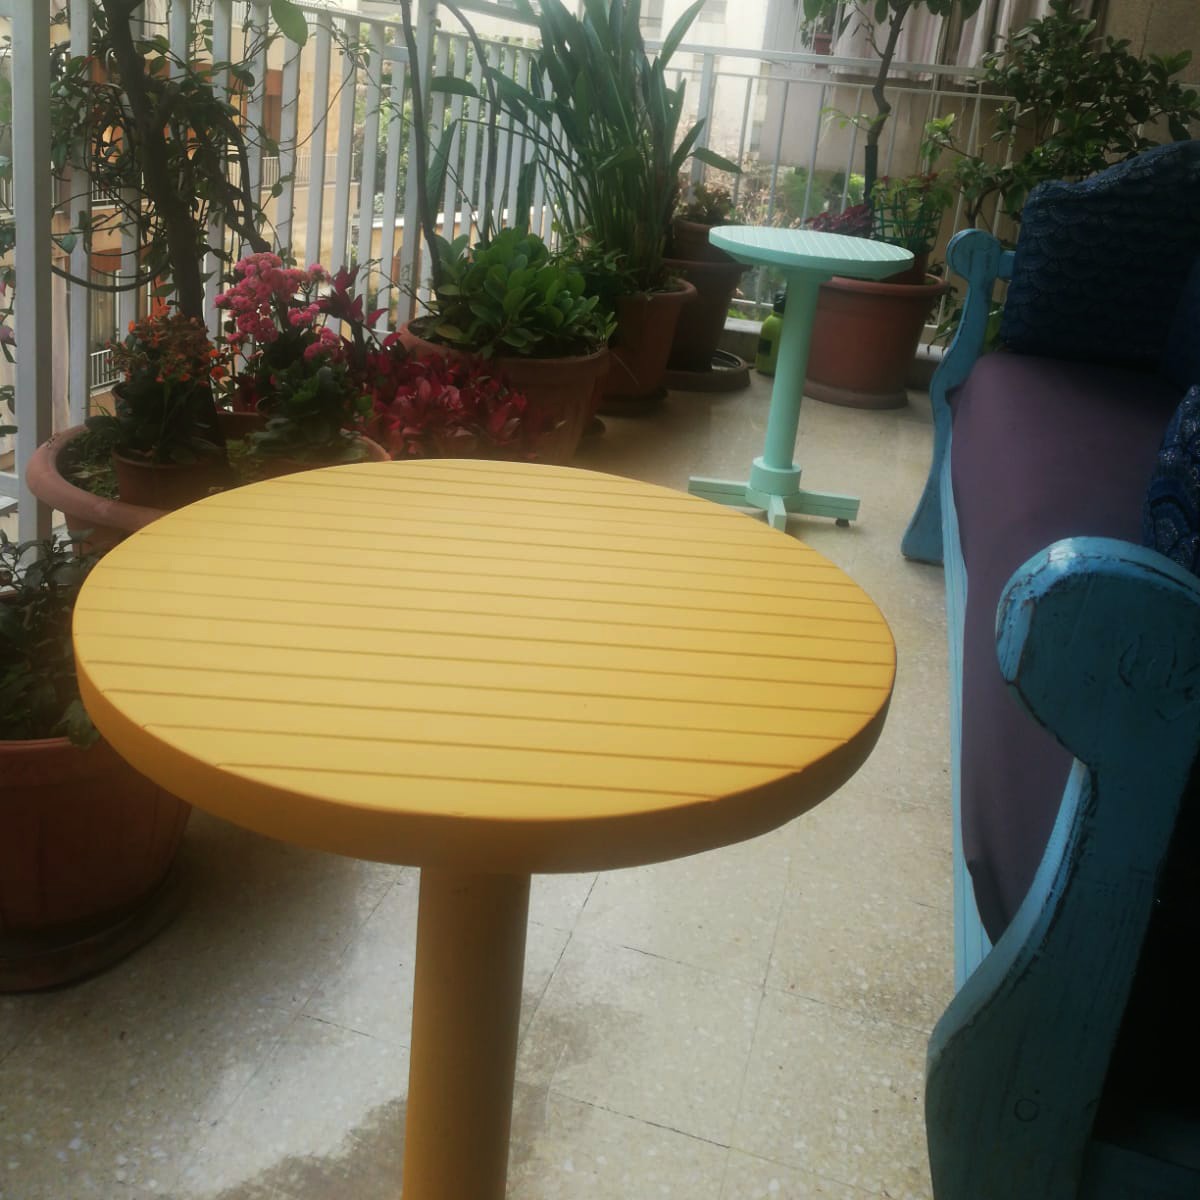 Our latest #coffee #tables made entirely from 100% #singleuse #plastics dotting this wonderful #beirut #balcony. Proper #wastemanagement  , diversion from #landfills, and #recycling are the only way forward for the impeding waste crisis looming on the horizon in #Lebanon